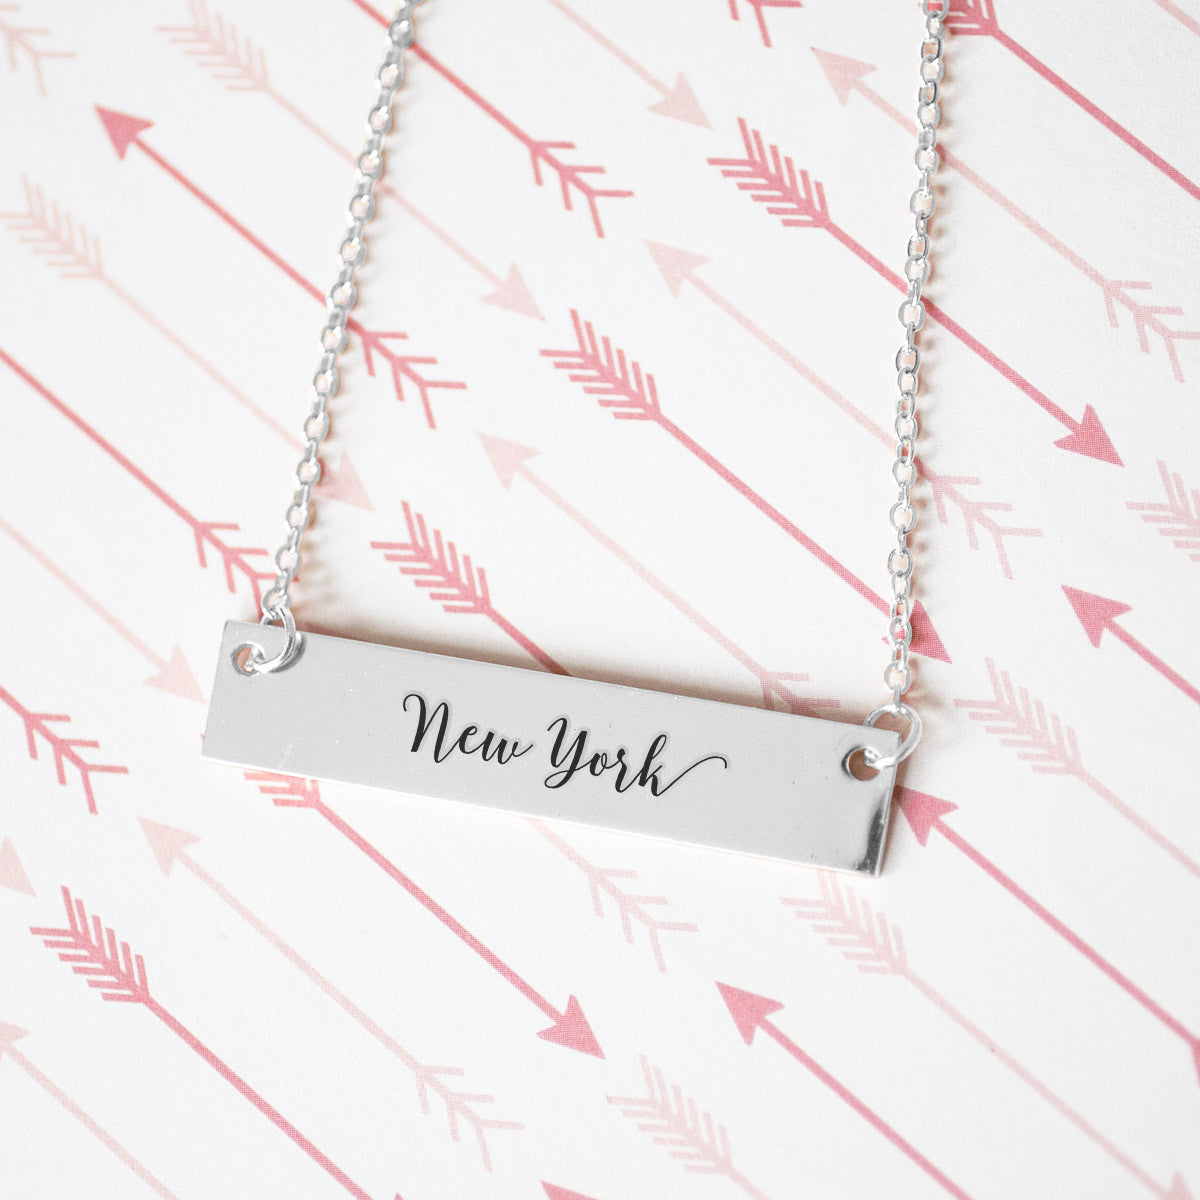 New York Gold / Silver Bar Necklace - pipercleo.com